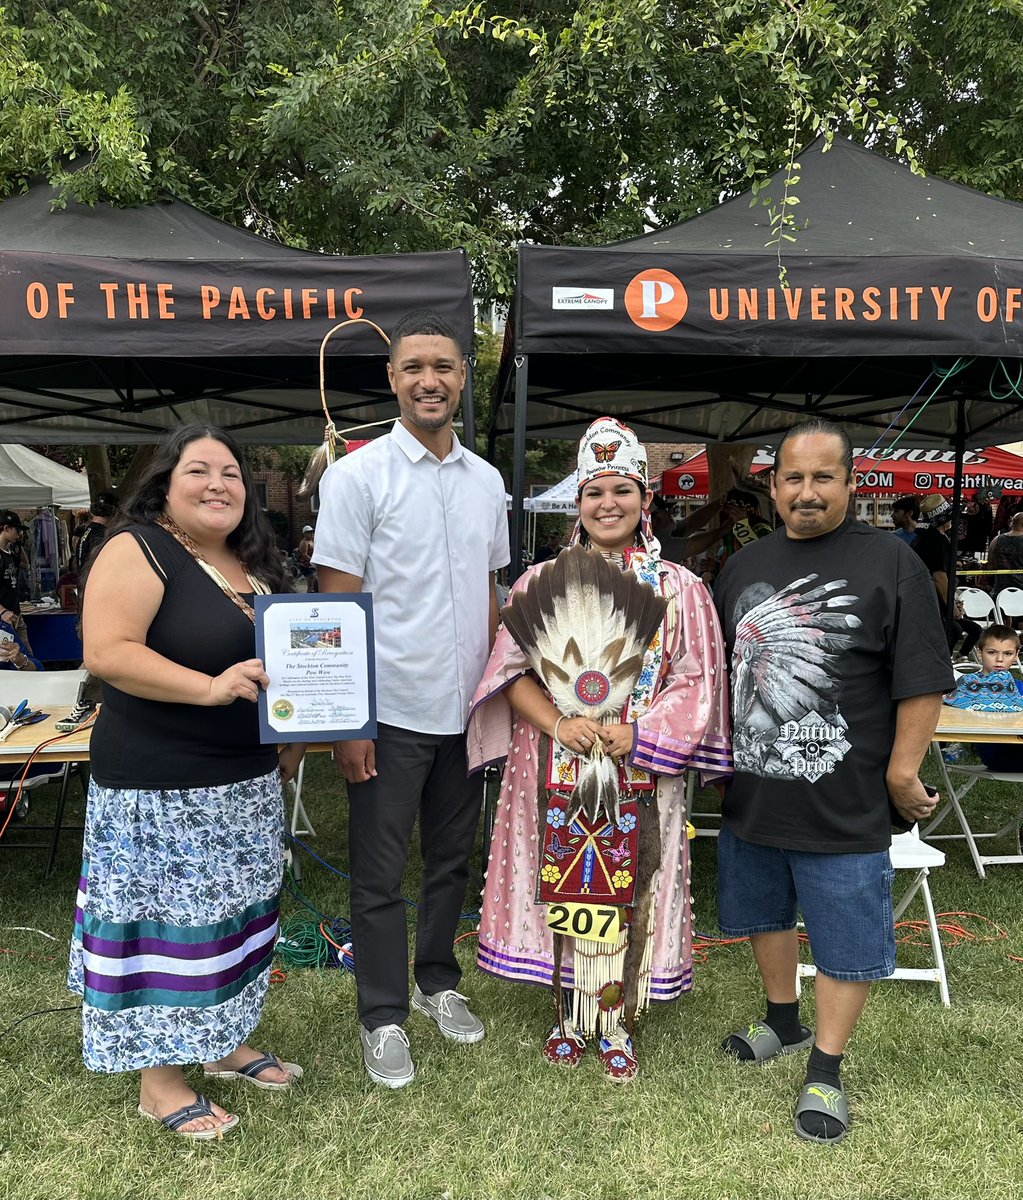 Happy Indigenous Peoples’ Day! Stockton is proud to celebrate the rich cultural history, traditions, and contributions of indigenous people throughout our city and nation.